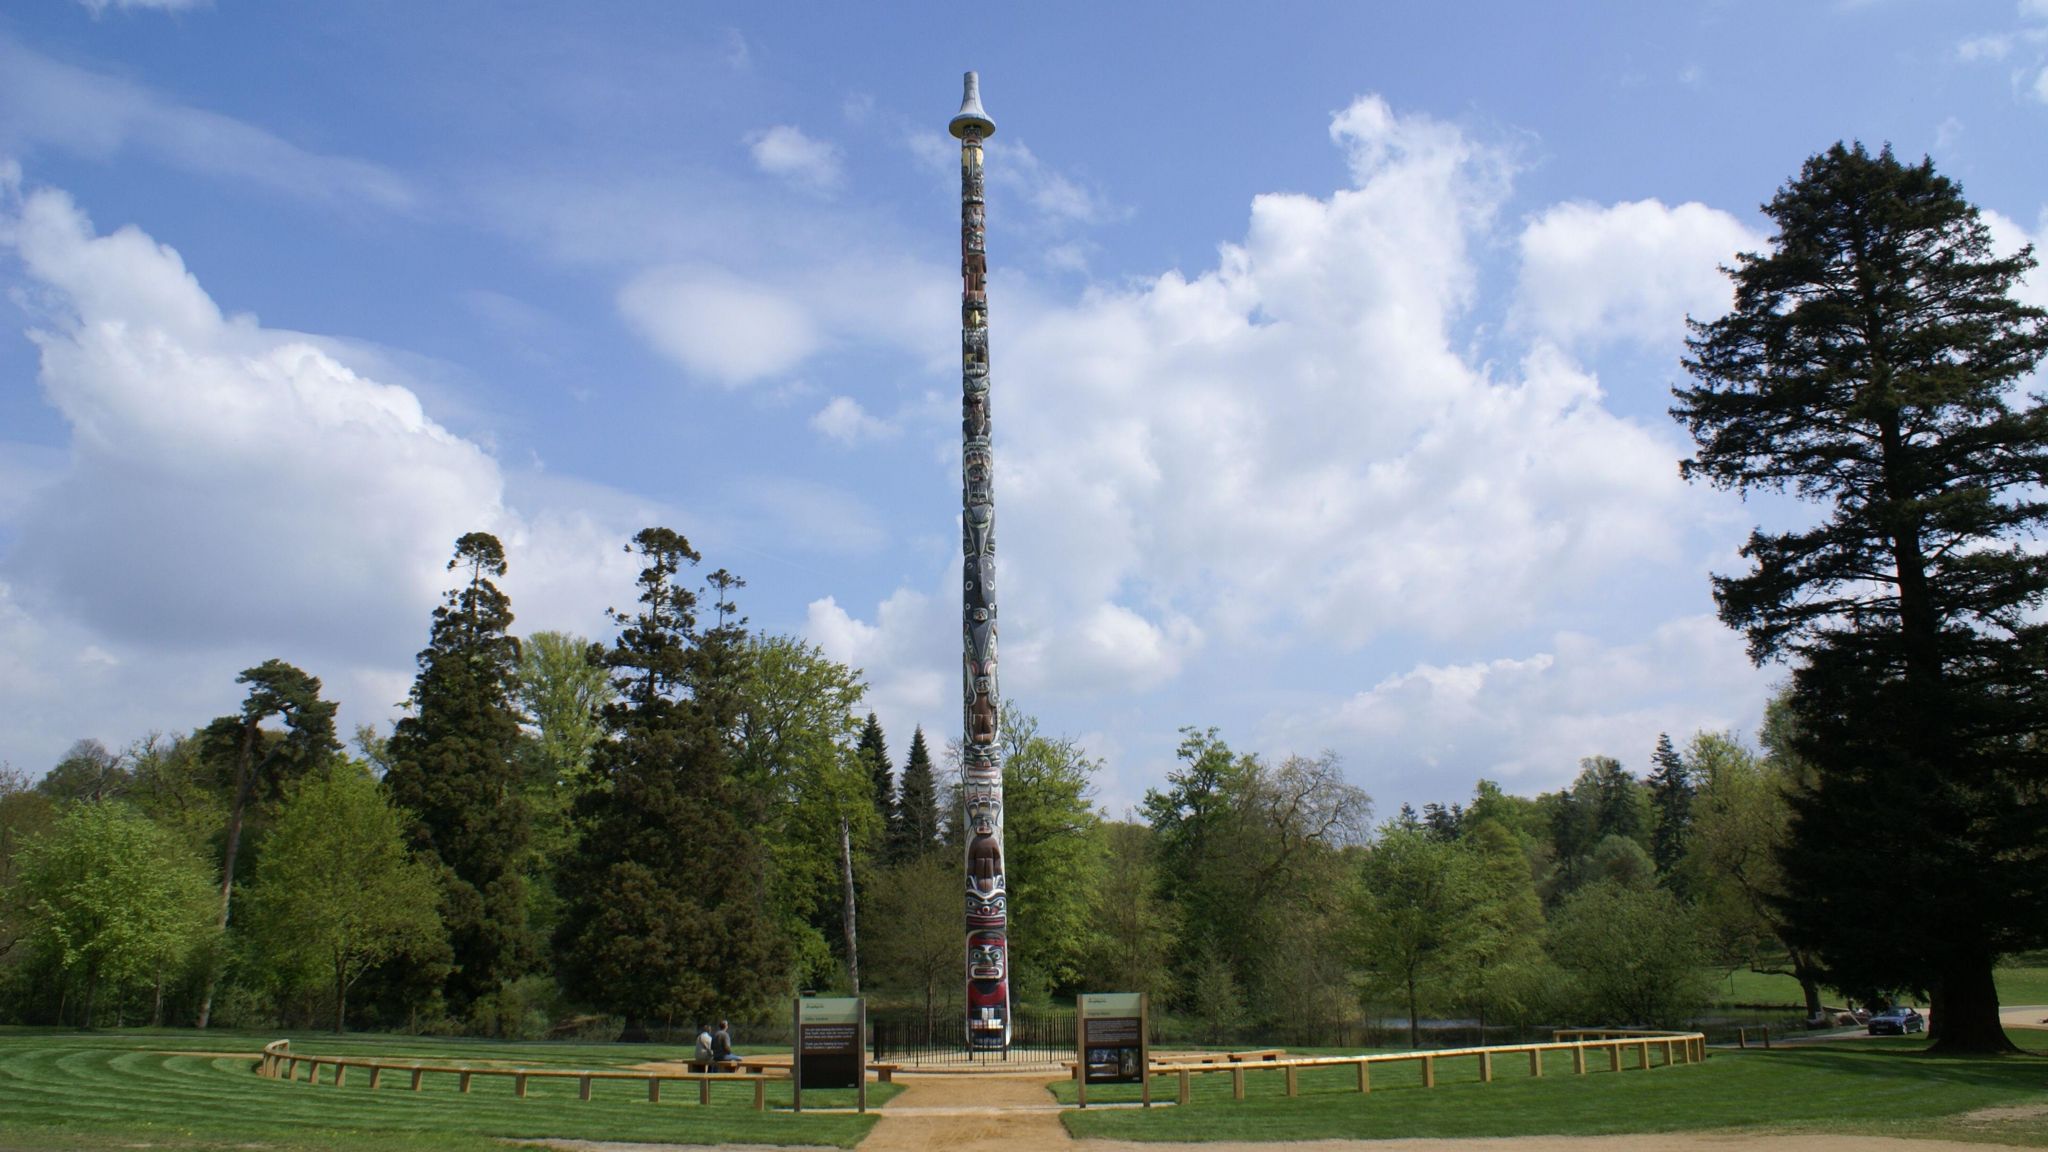 A totem pole stands in the middle of the image. There are trees around it and a low fence